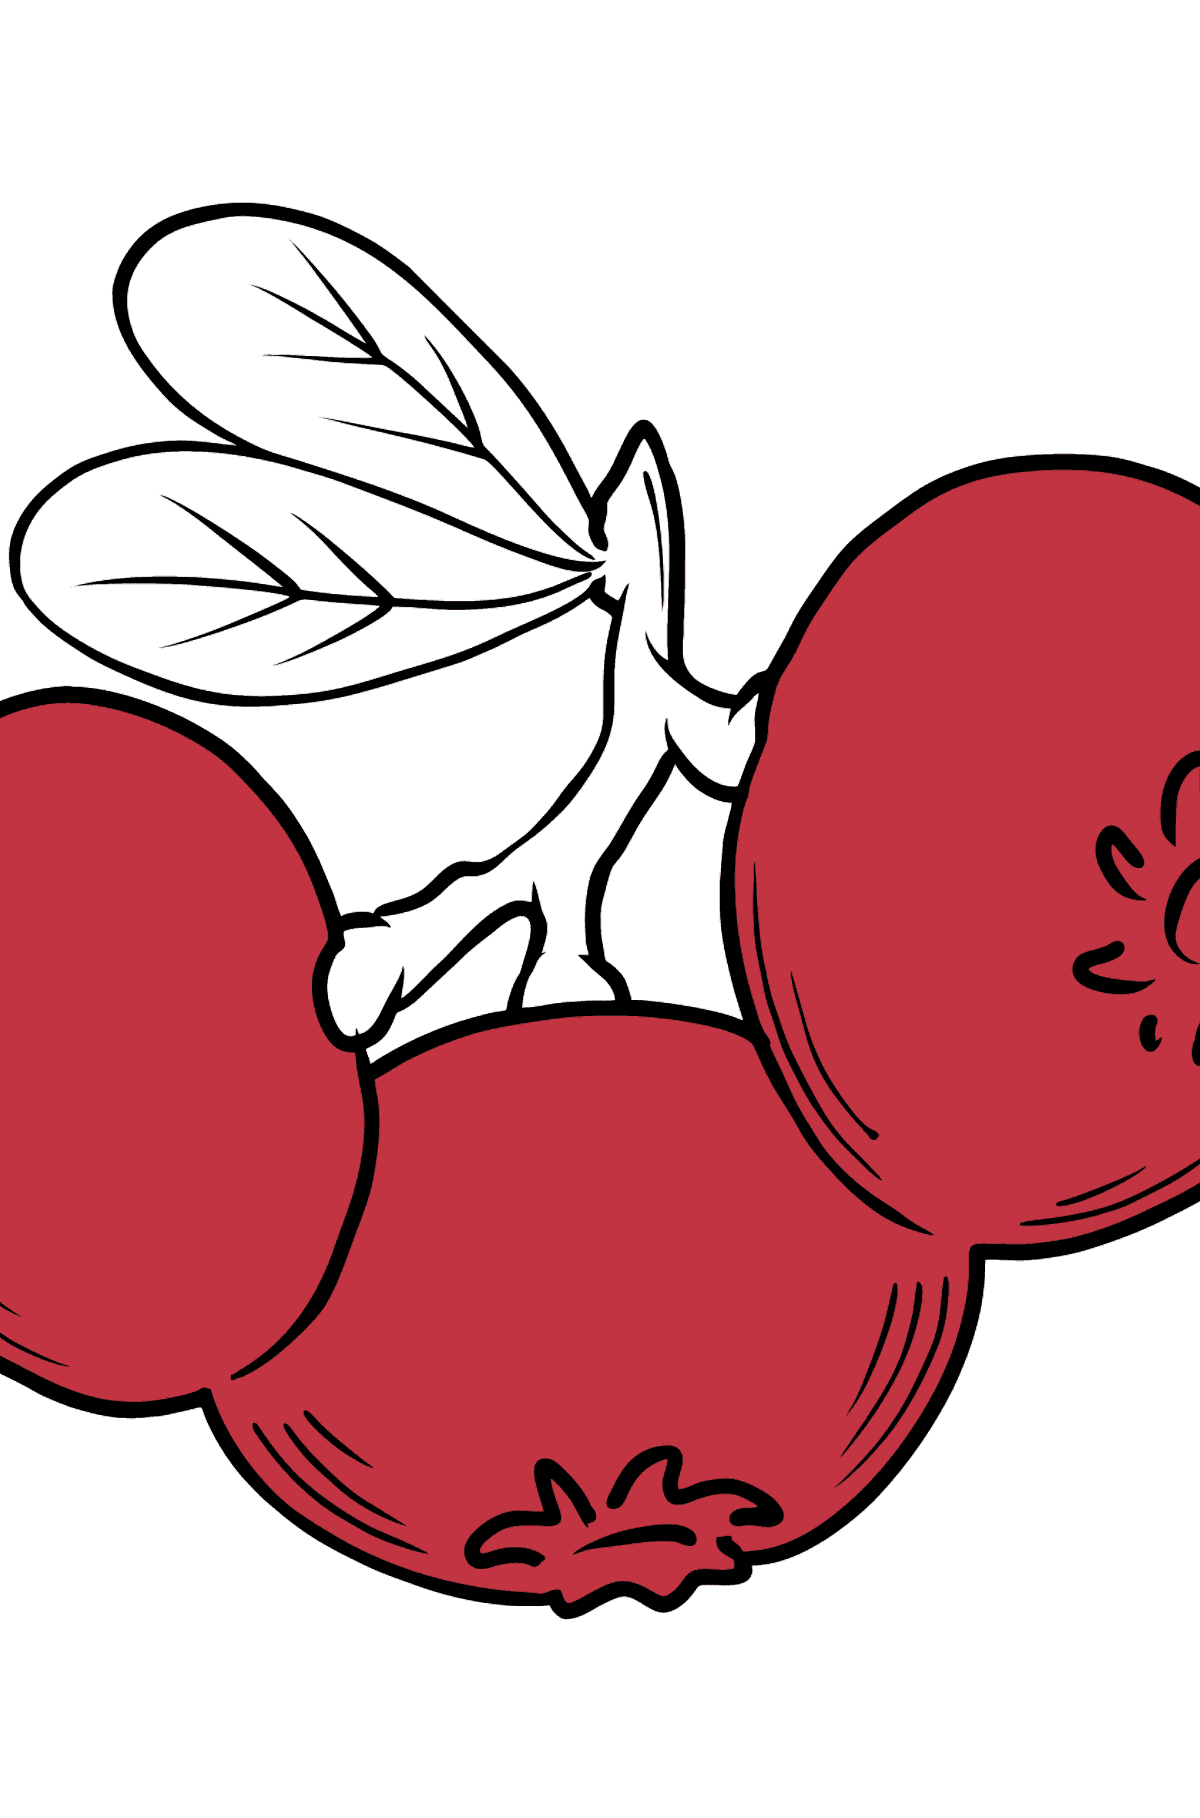 Cranberry coloring page - Coloring Pages for Kids